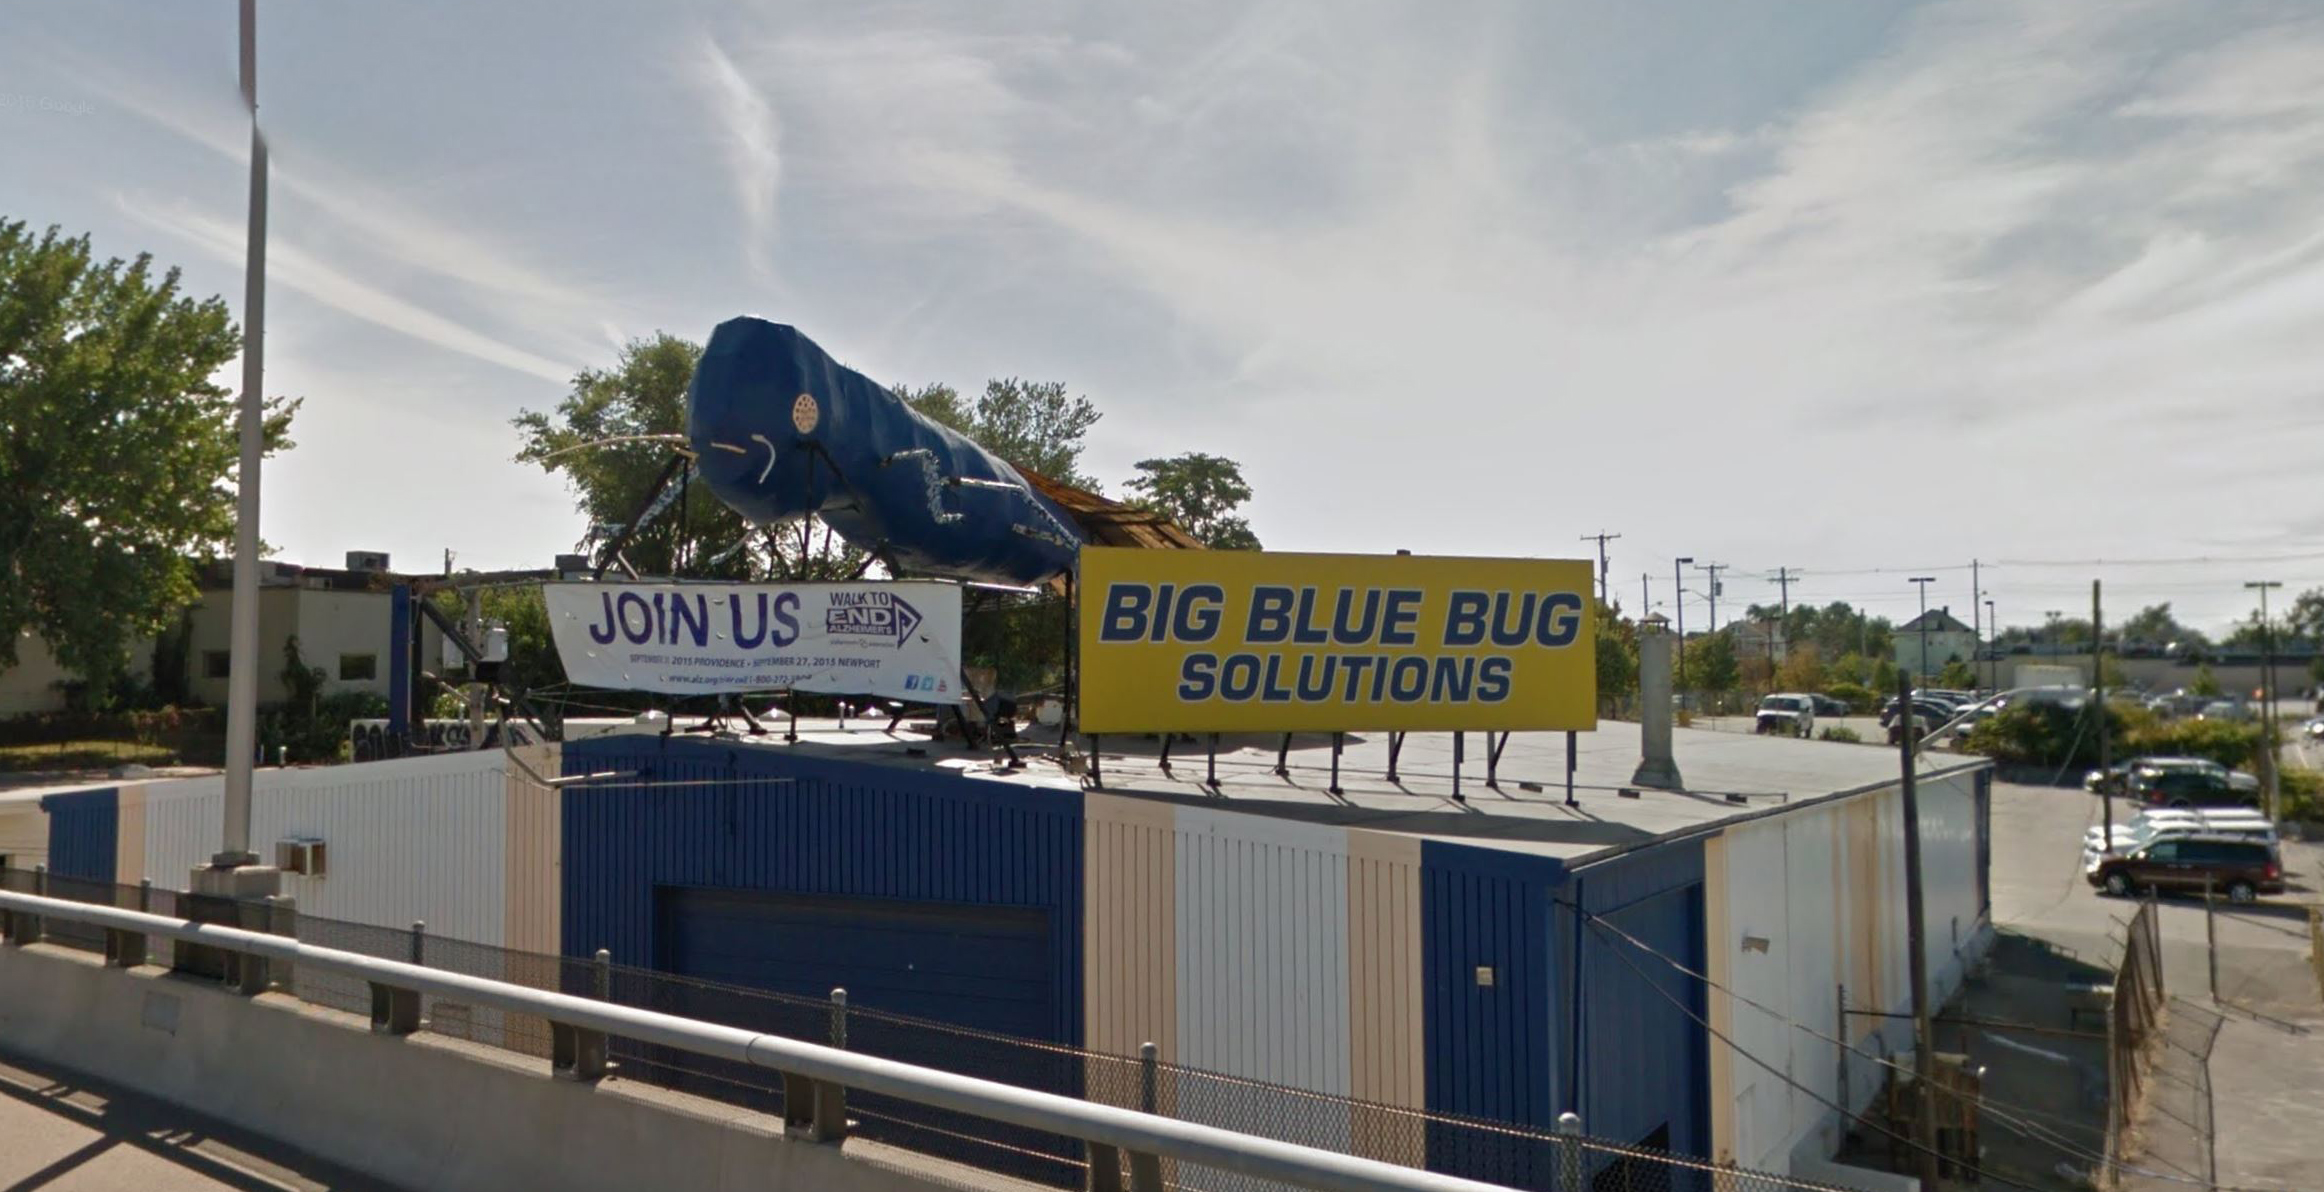 PHOTO: The Big Blue Bug, the giant termite mascot of Big Blue Bug Solutions located along I-95 in Providence, R.I., is pictured in this image from Google Maps.